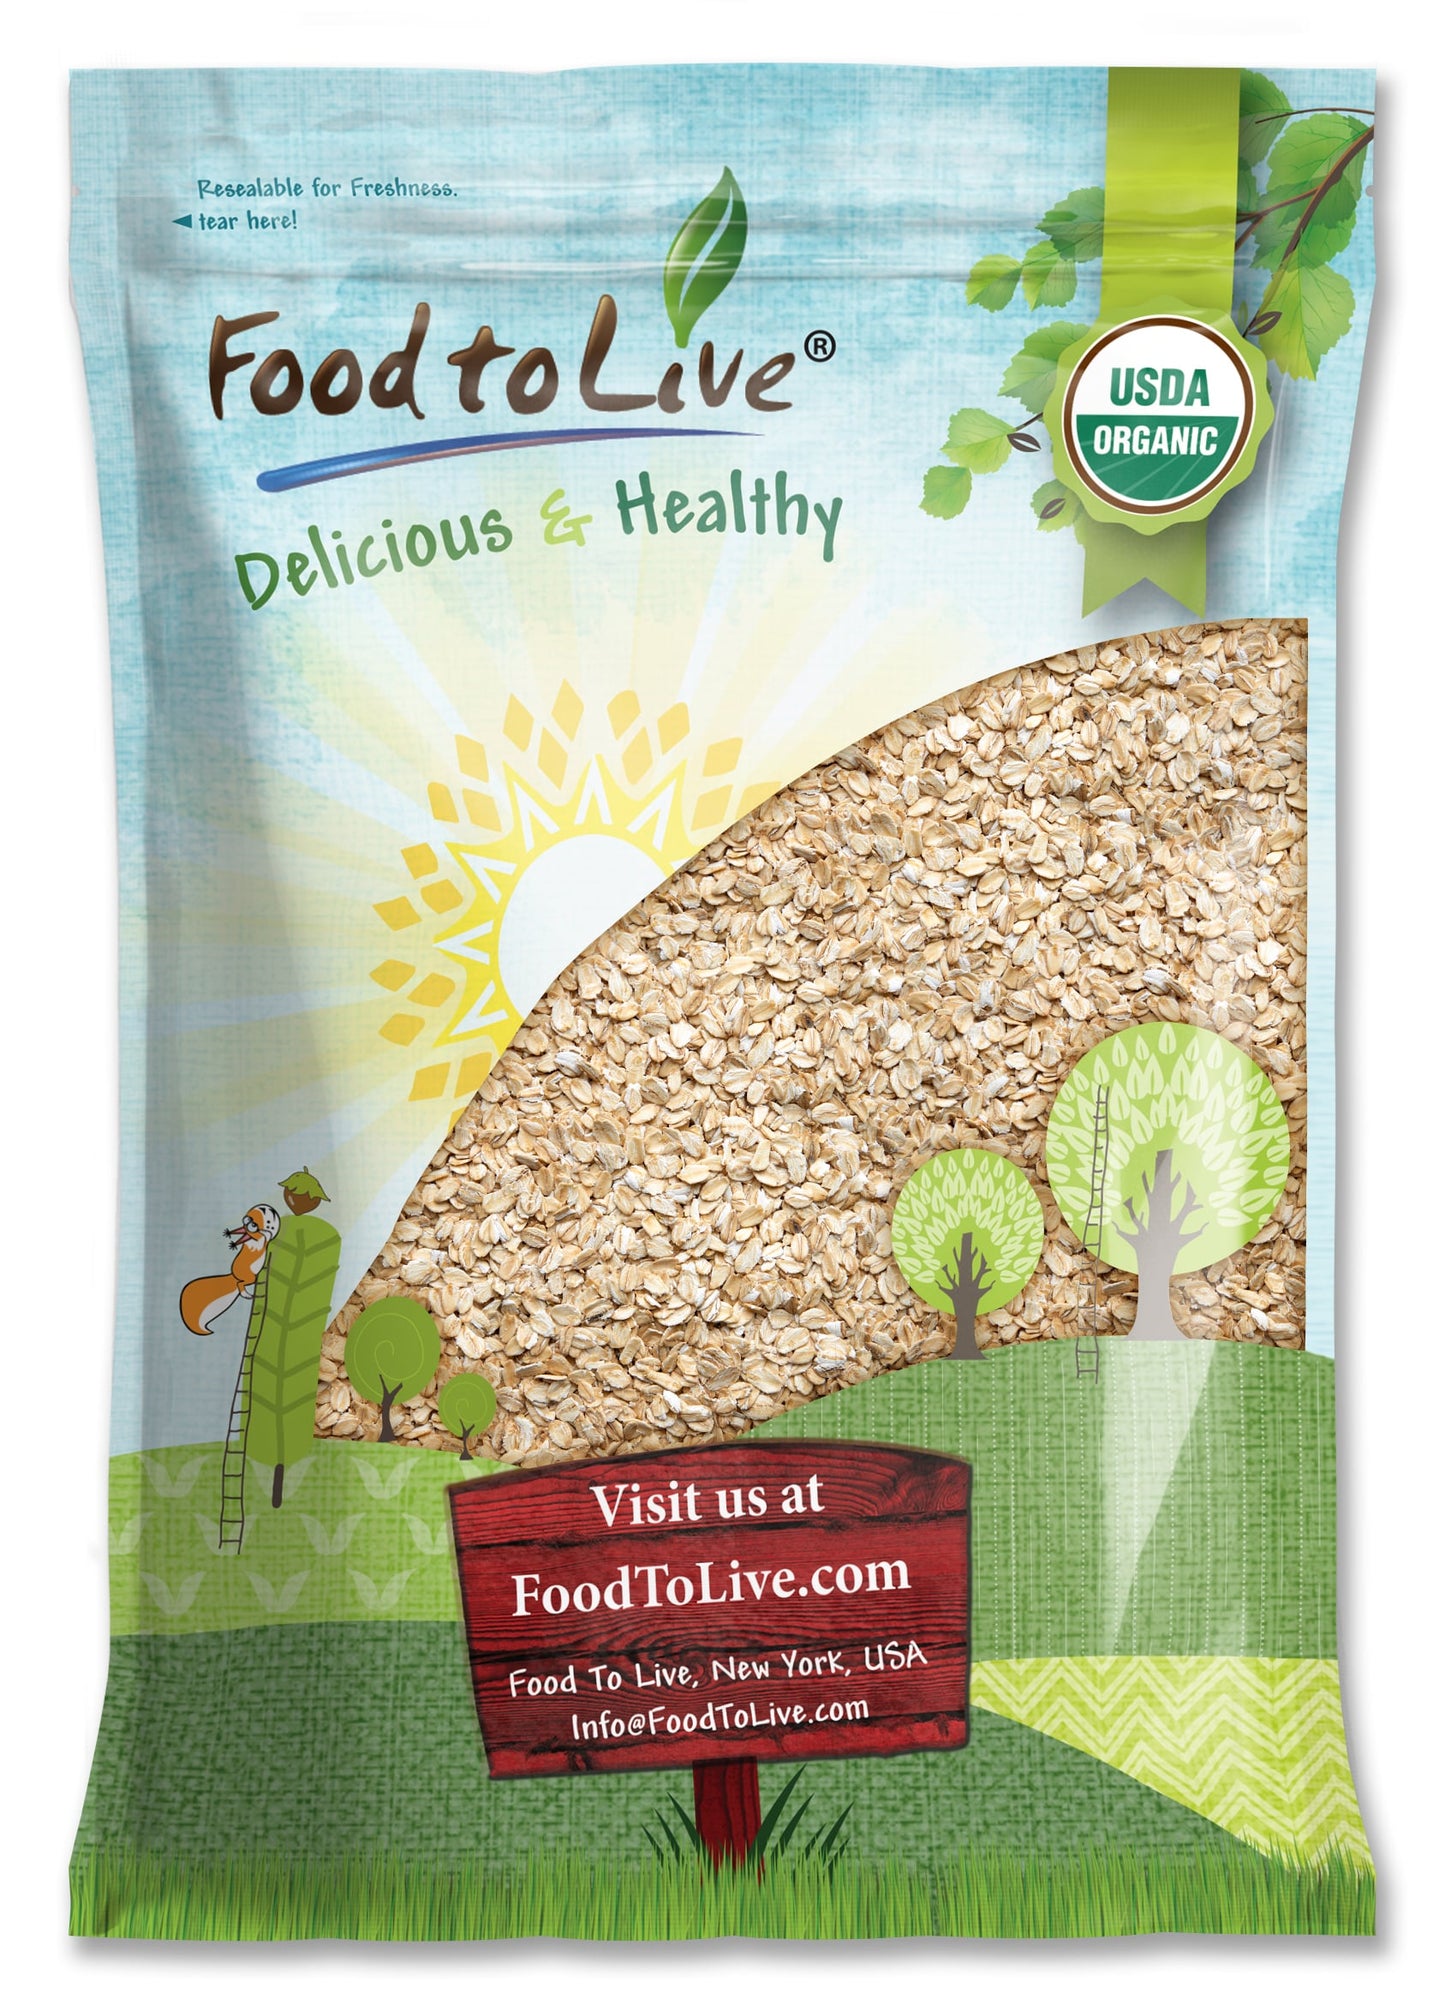 Certified Gluten Free Organic Regular Rolled Oats – Non-GMO, Old-Fashioned, 100% Whole Grain, Vegan, Bulk. Rich in Fiber. Great for Oatmeal, Cereal, Granola, Cookies. Made in USA